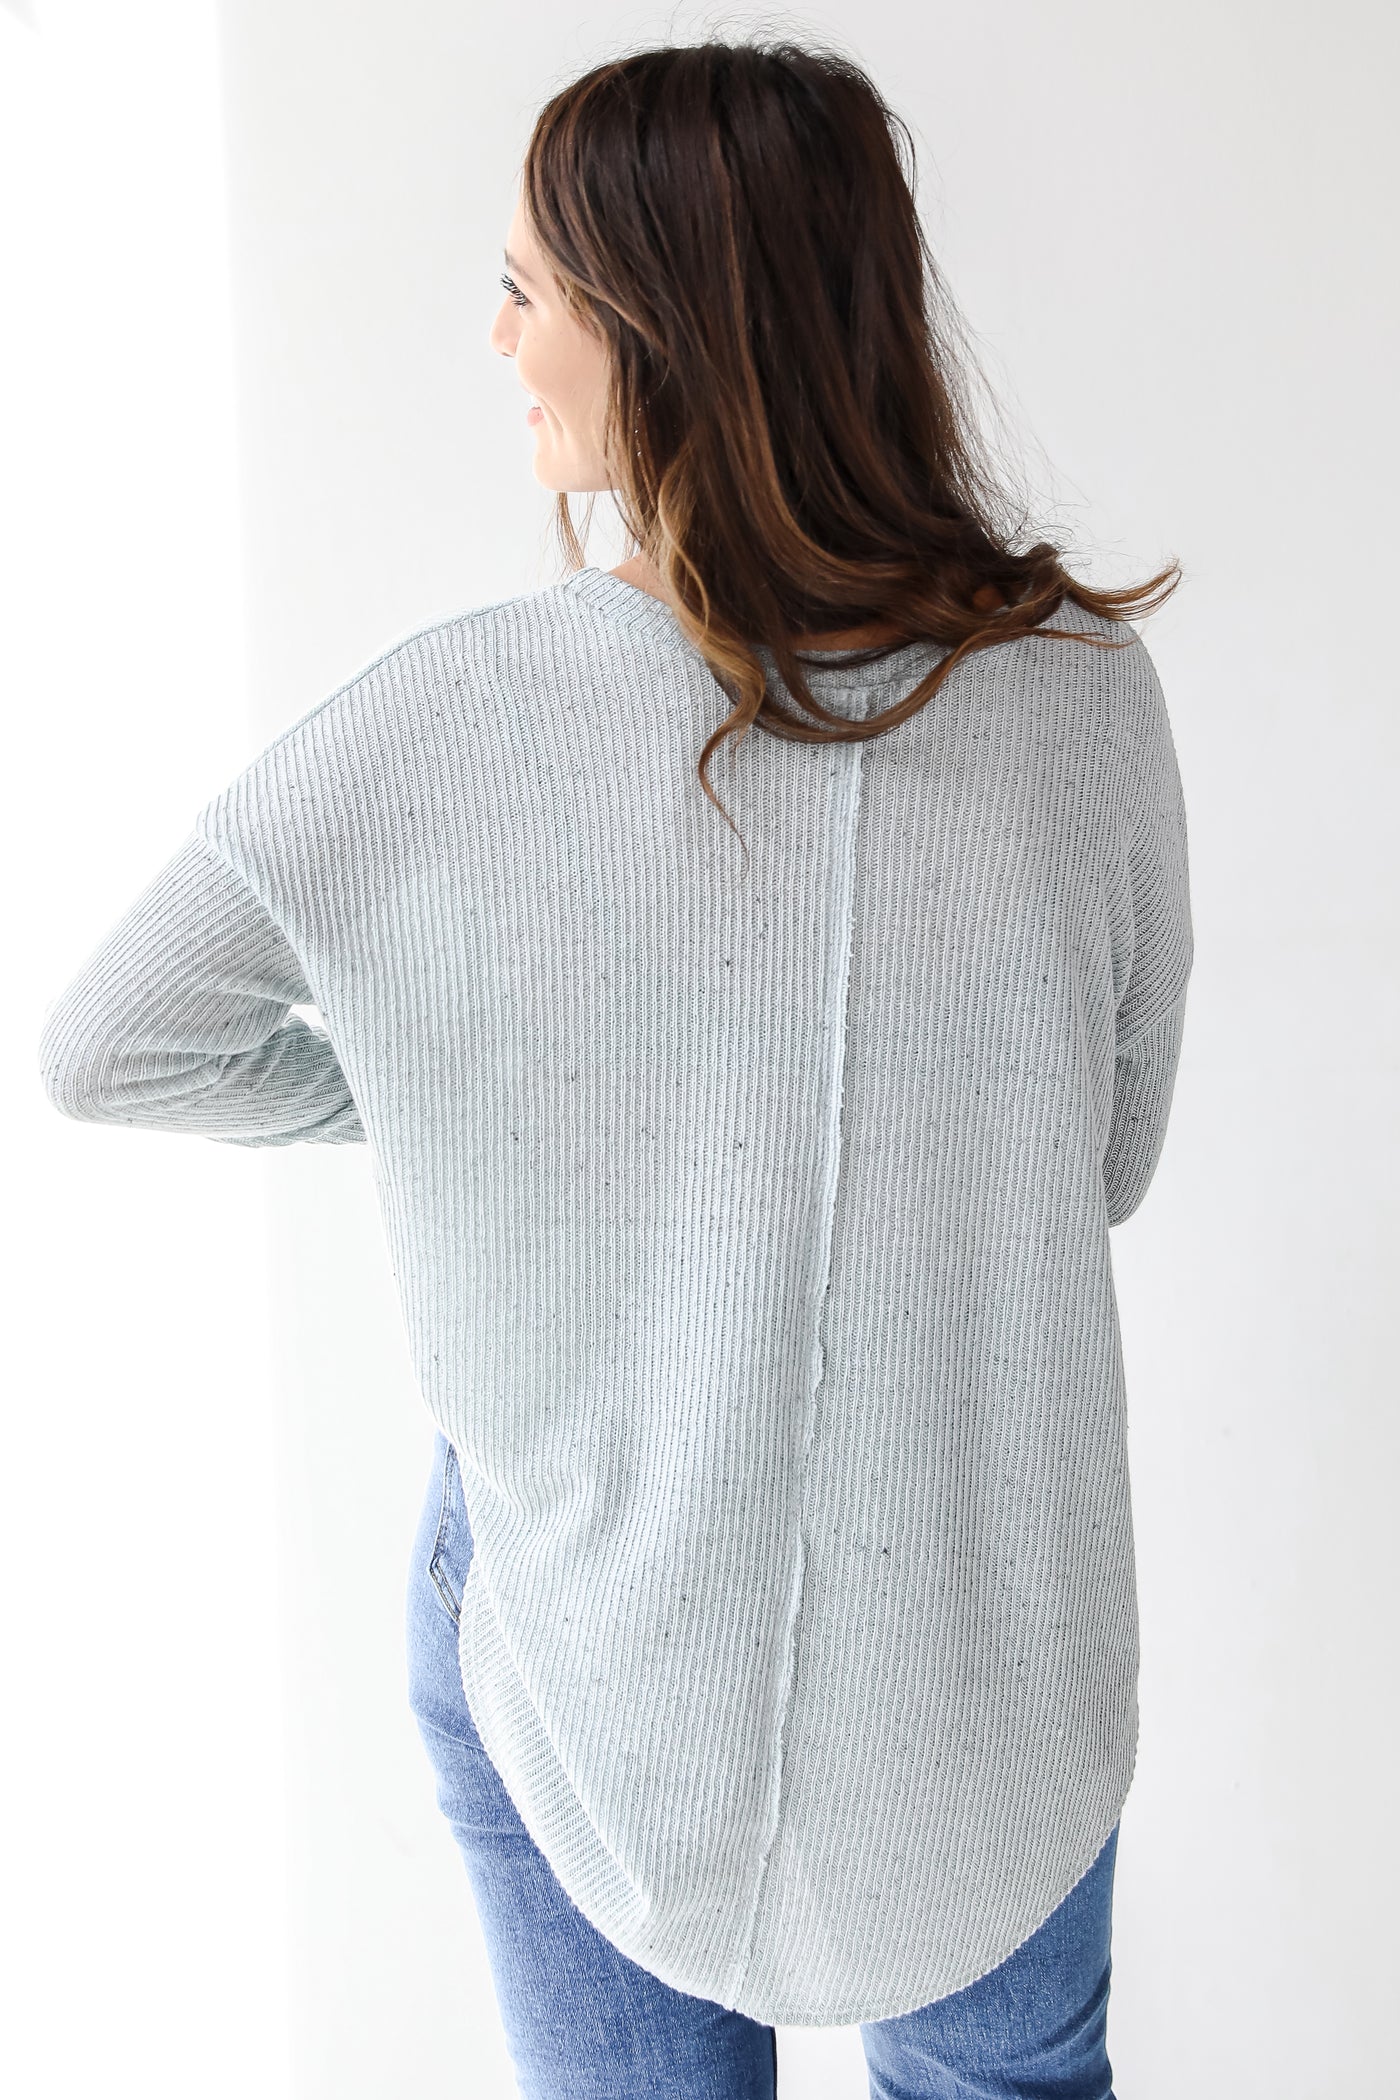 blue knit top back view